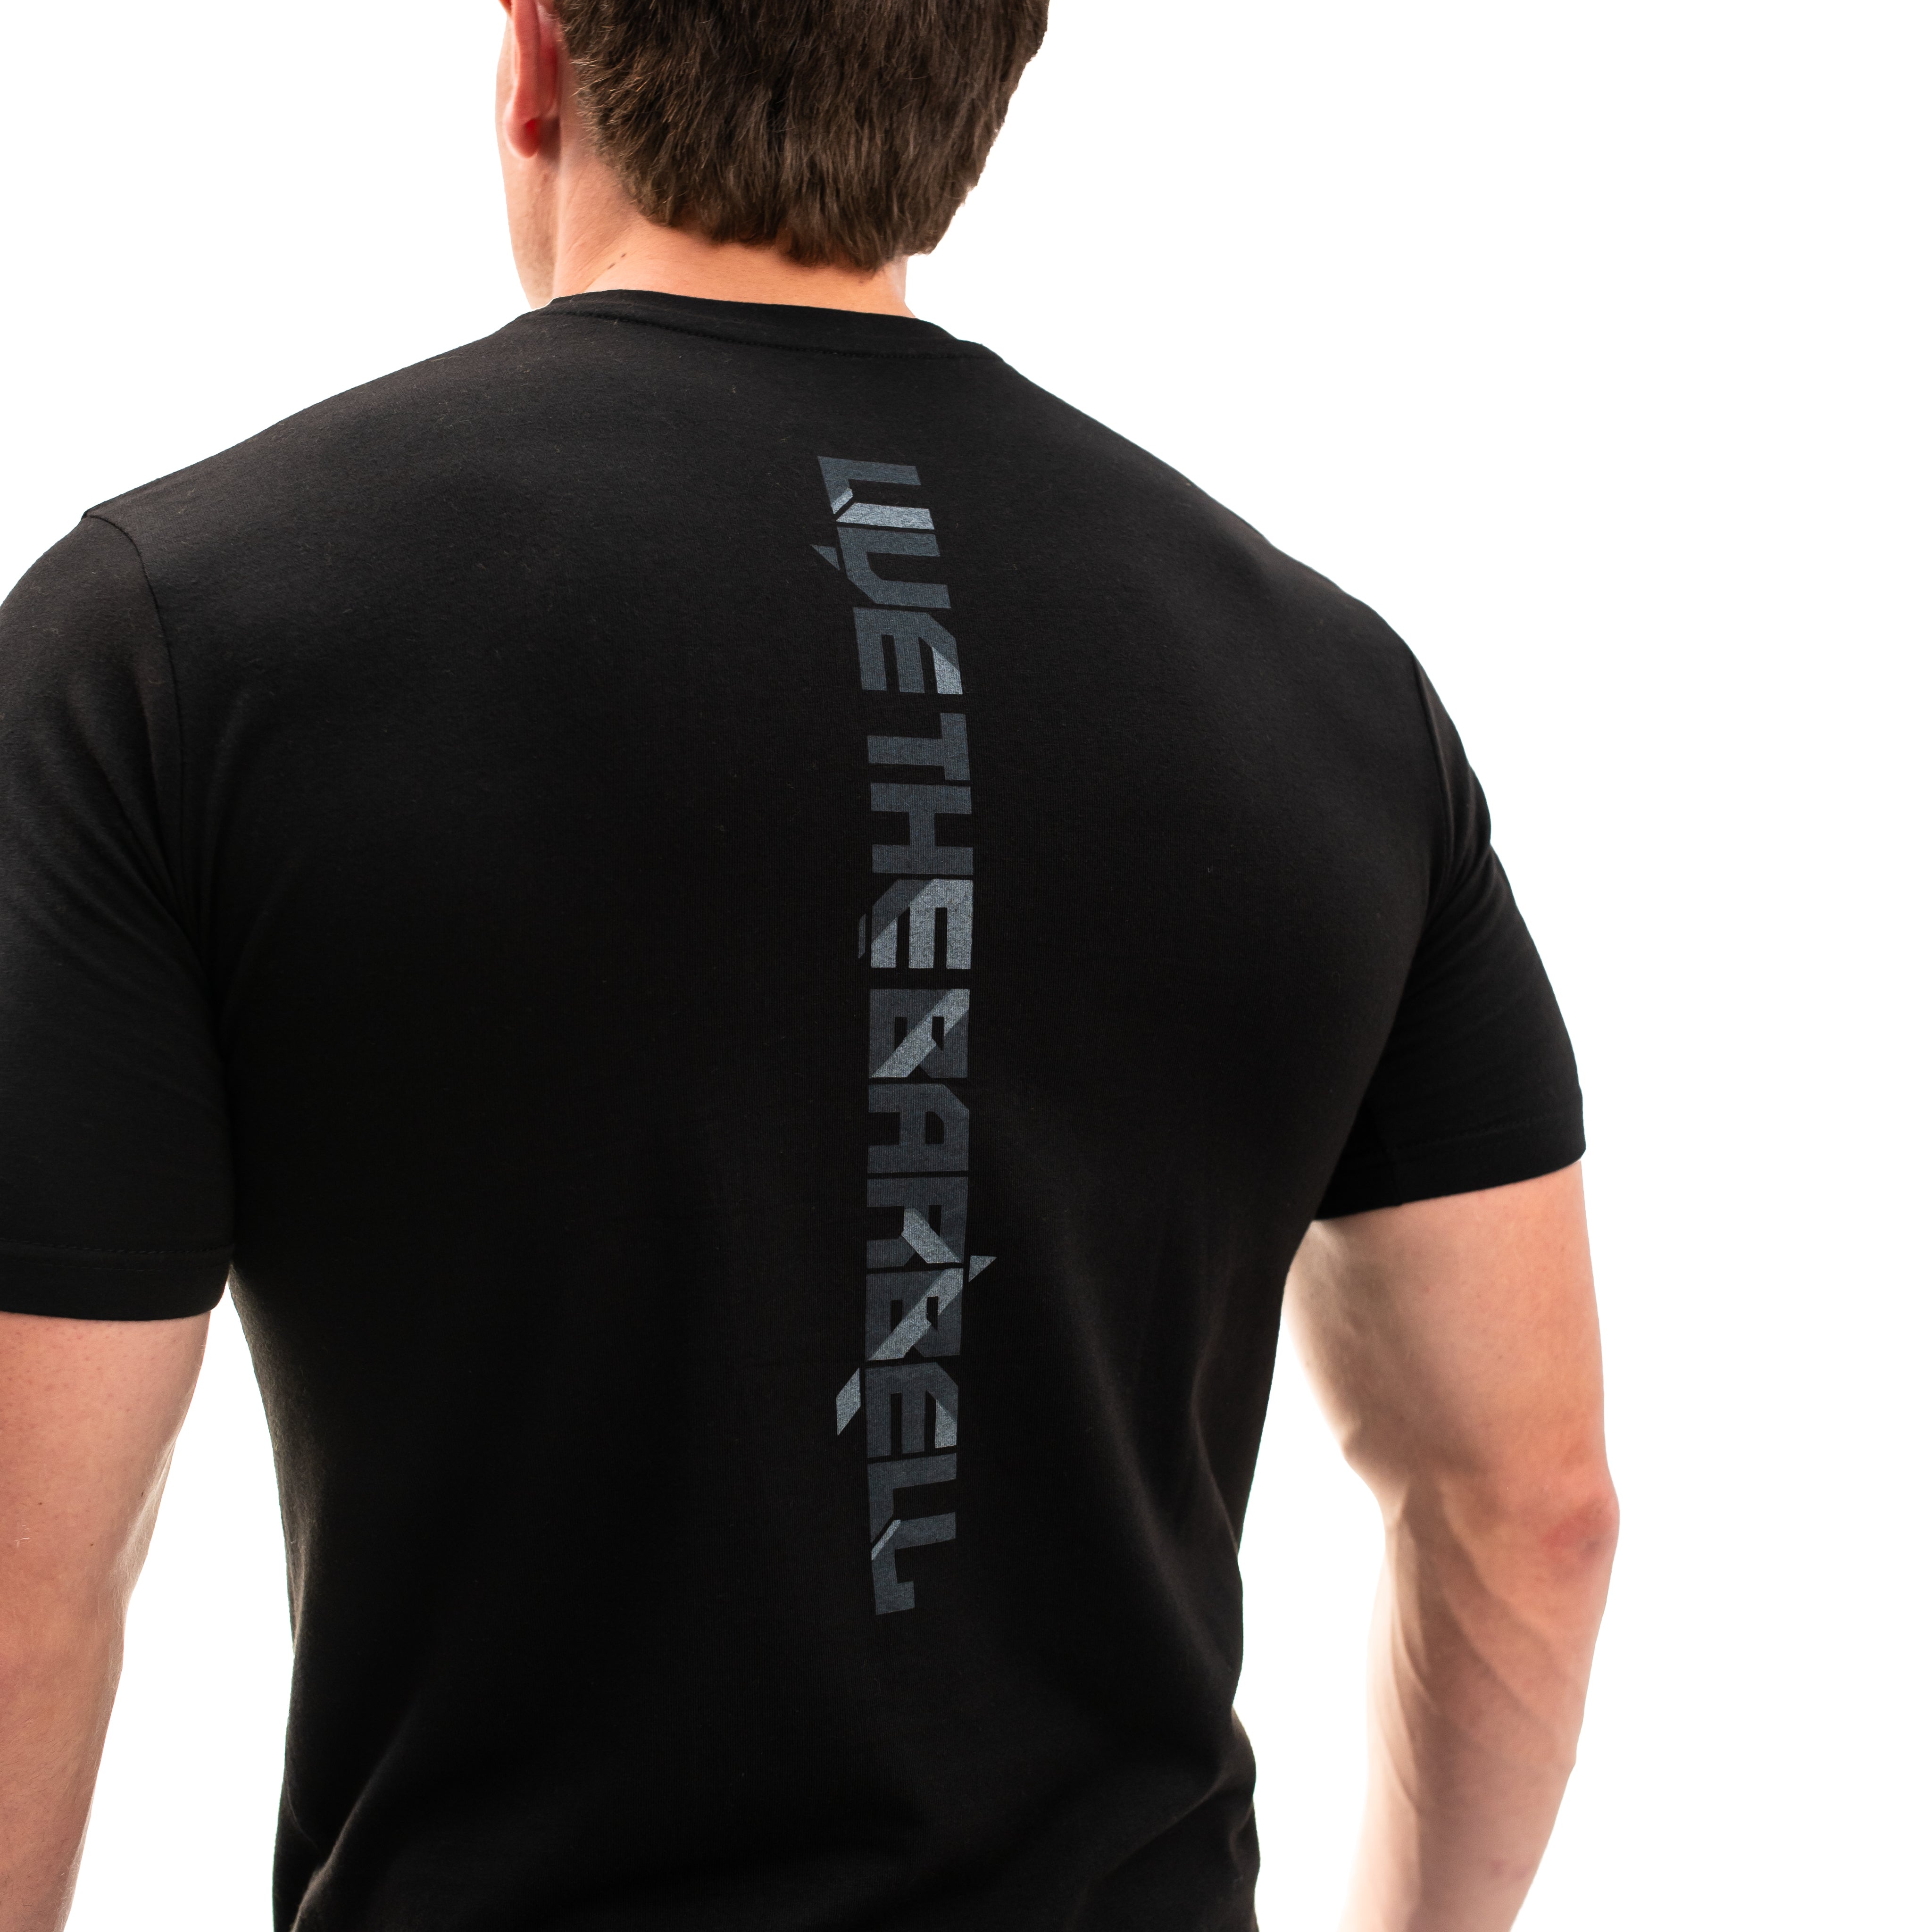 LTB Hinge Bar Grip T-shirt, great as a squat shirt. Purchase LTB Hinge Bar Grip t-shirt from A7 UK. Purchase LTB Hinge Bar Grip Shirt Europe from A7 Europe. No more chalk and no more sliding. Best Bar Grip T shirts, shipping to UK and Europe from A7 UK. A7UK has the best Powerlifting apparel for all your workouts. Available in UK and Europe including France, Italy, Germany, the Netherlands, Sweden and Poland.